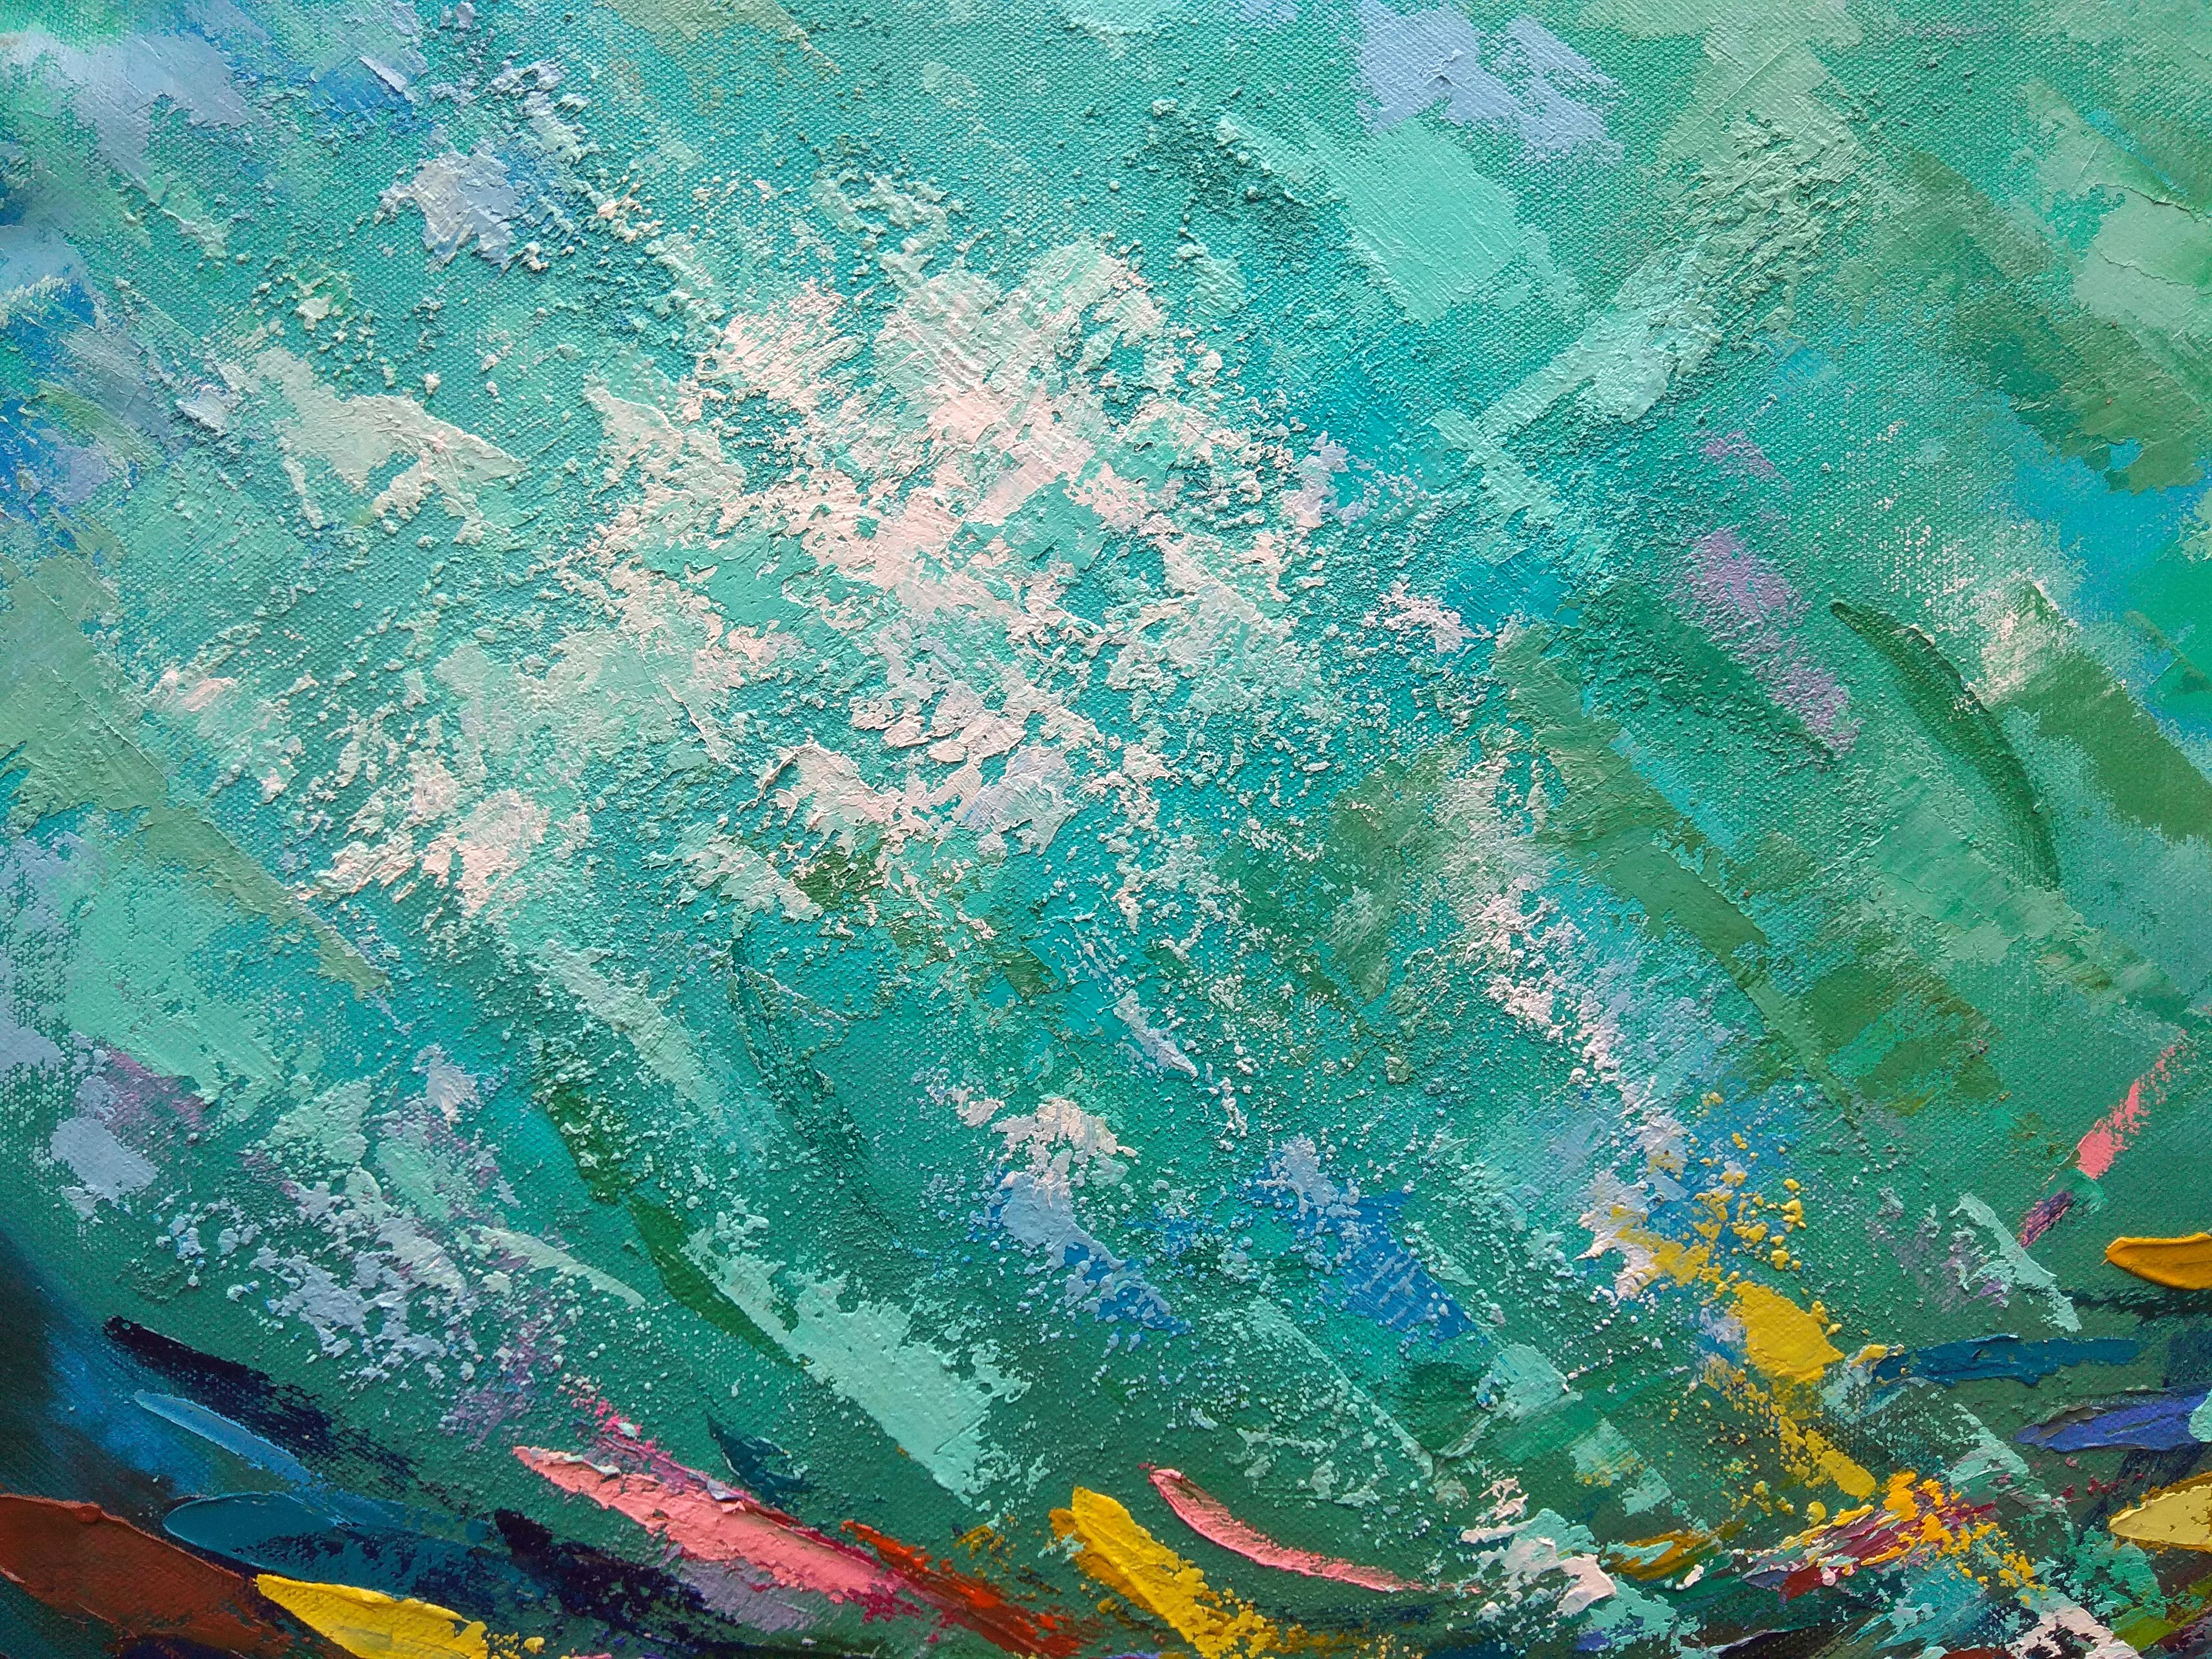 Abstract Fish Painting Seascape Ocean Art 3